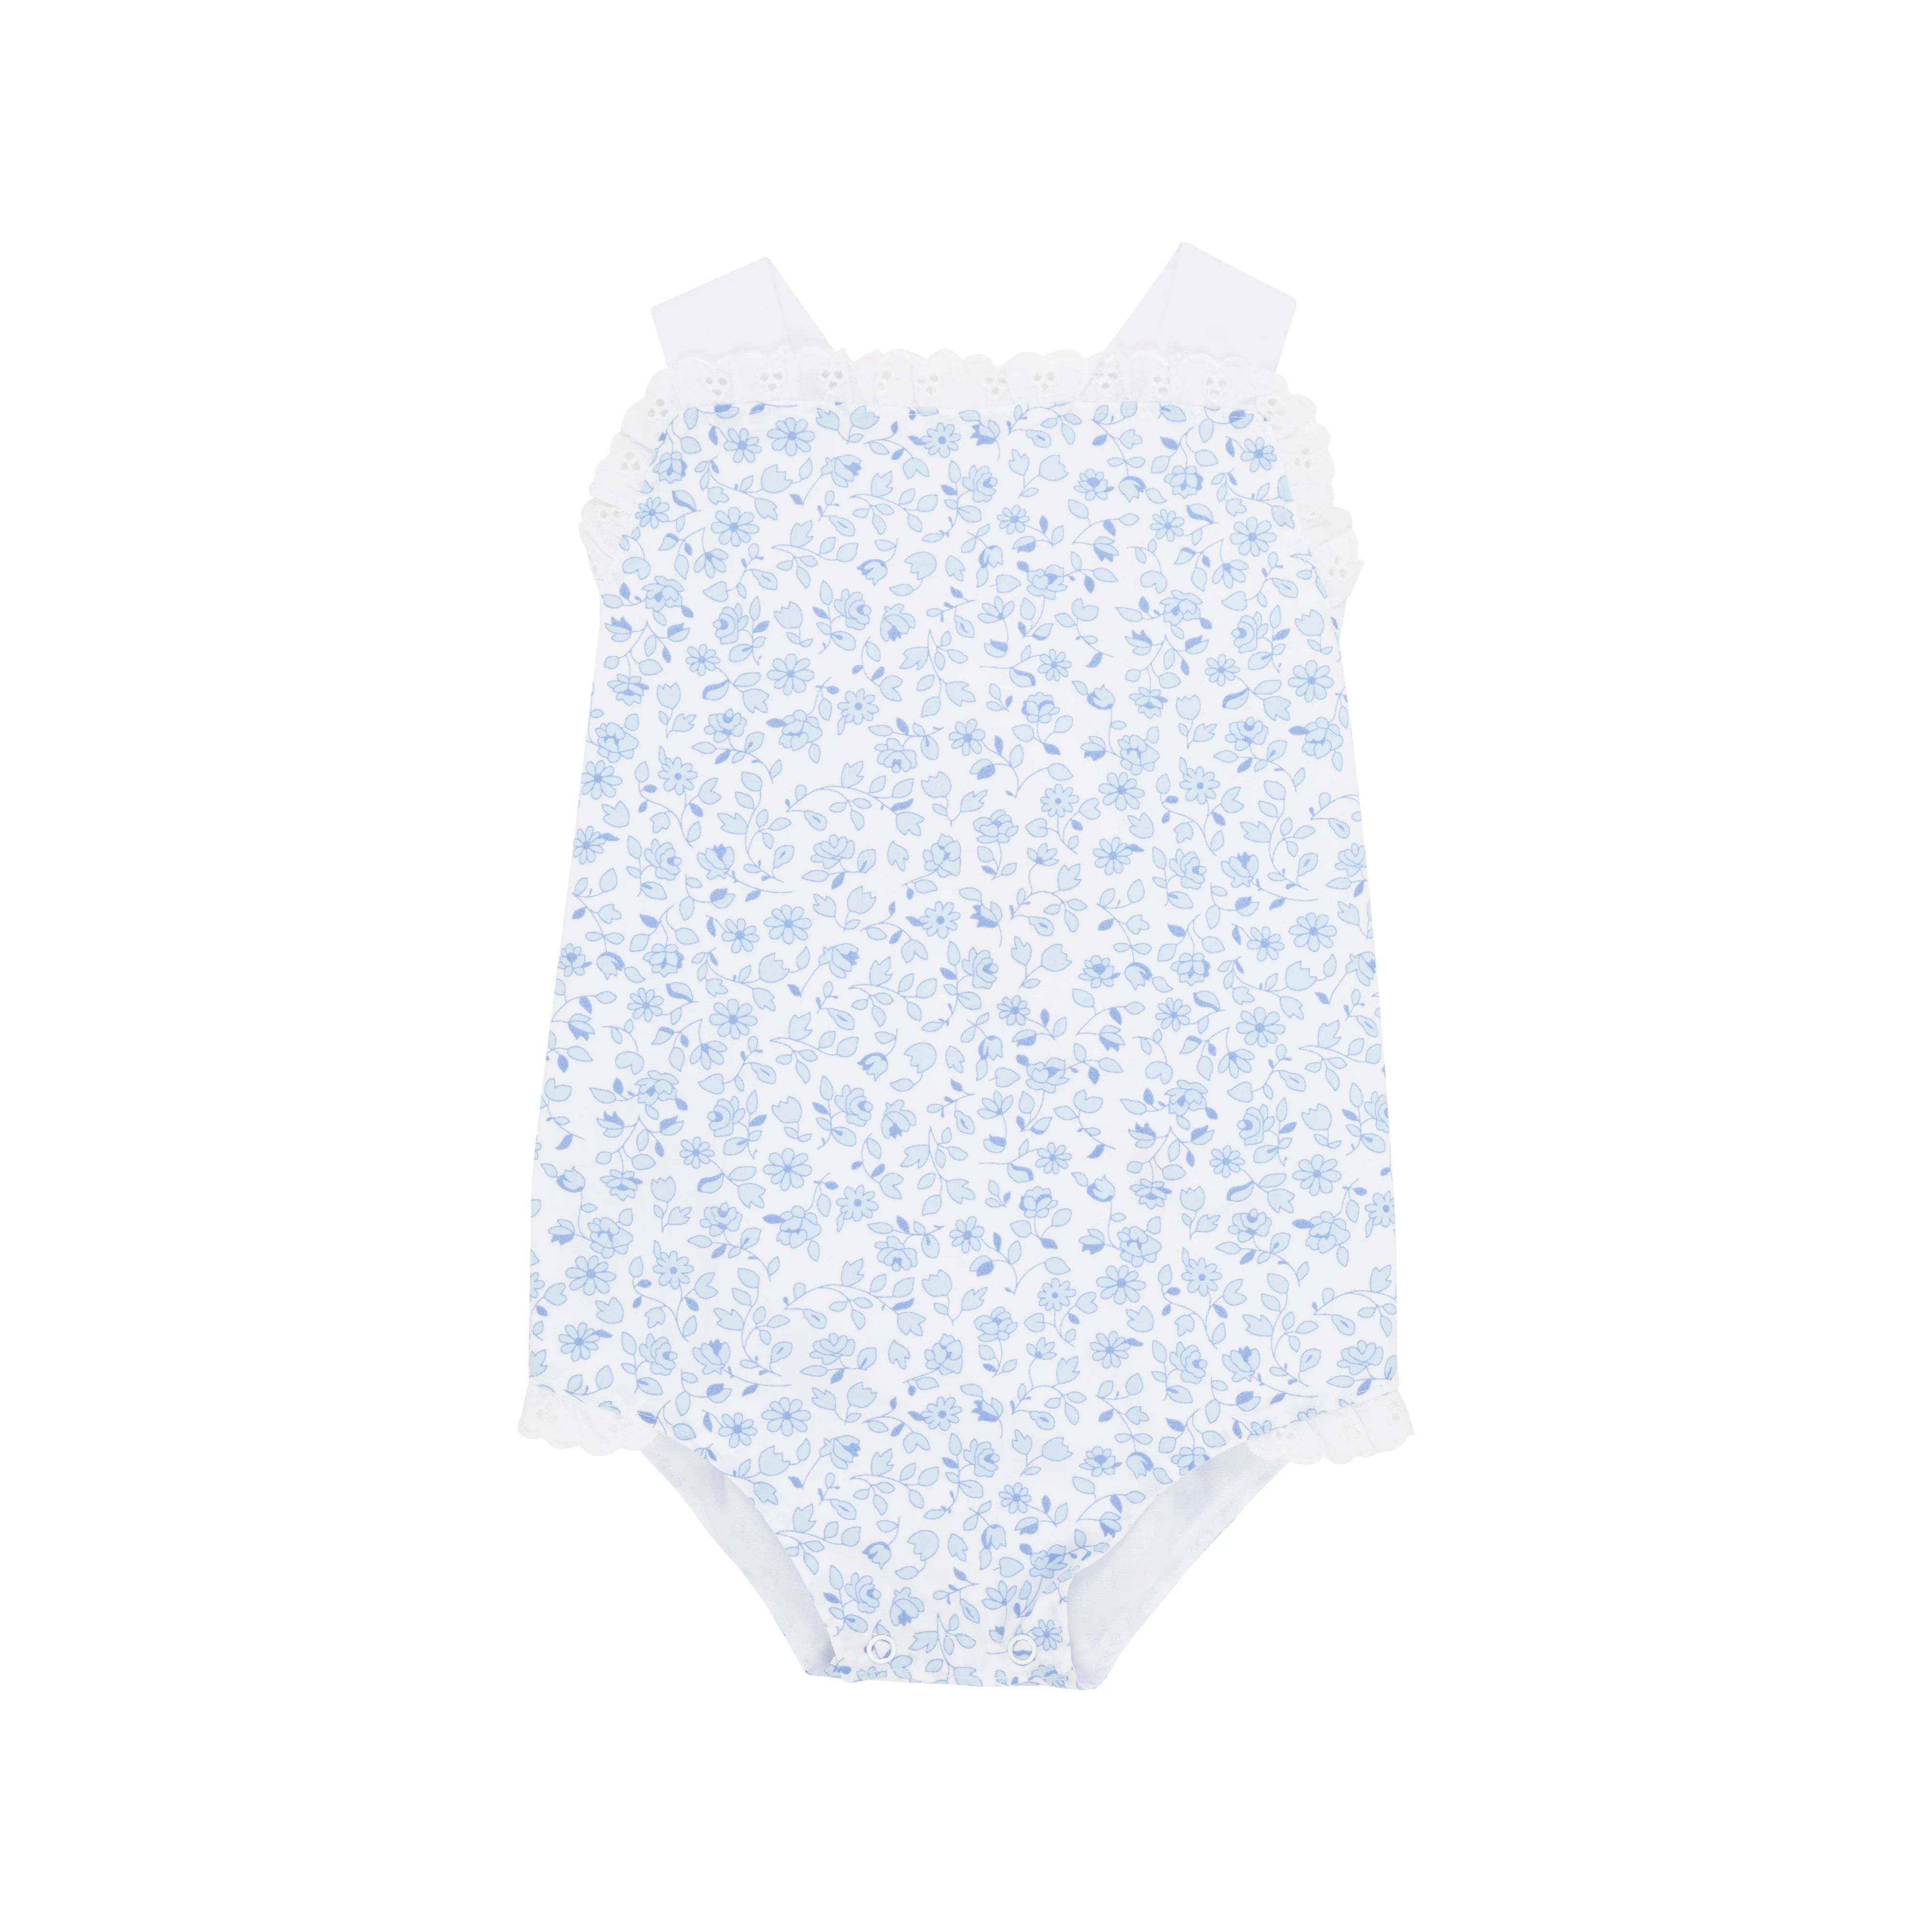 Sisi Sunsuit - Greenbriar Garden with Worth Avenue White | The Beaufort Bonnet Company